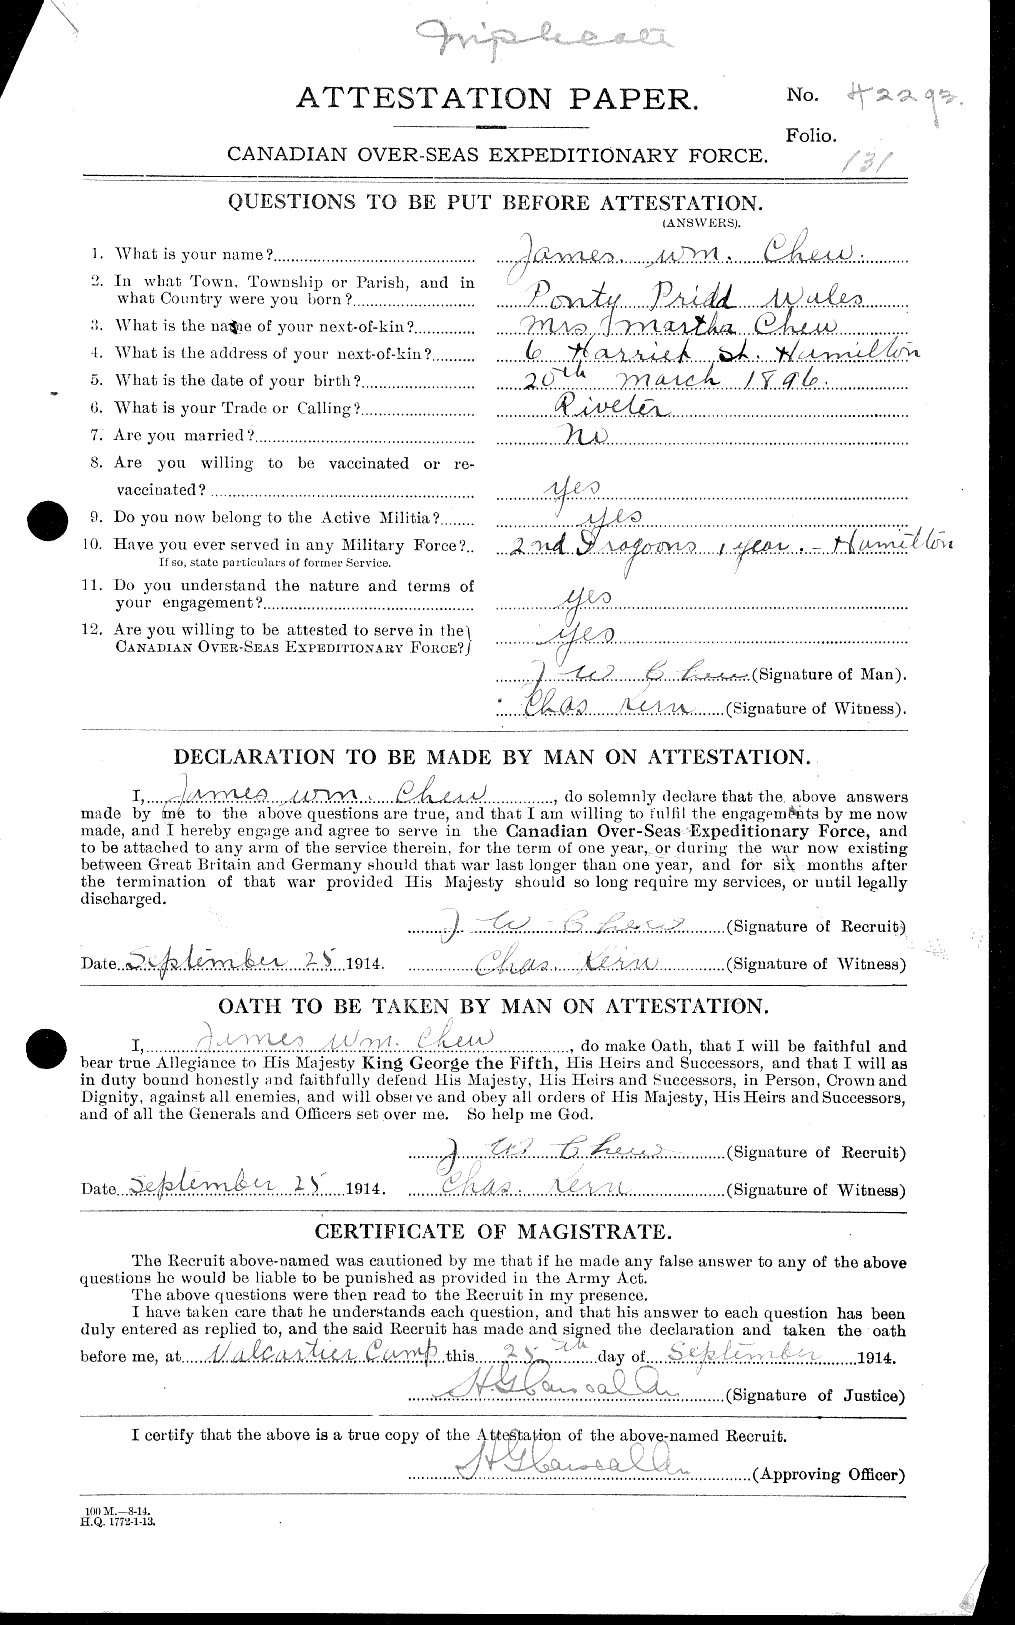 Personnel Records of the First World War - CEF 017907a